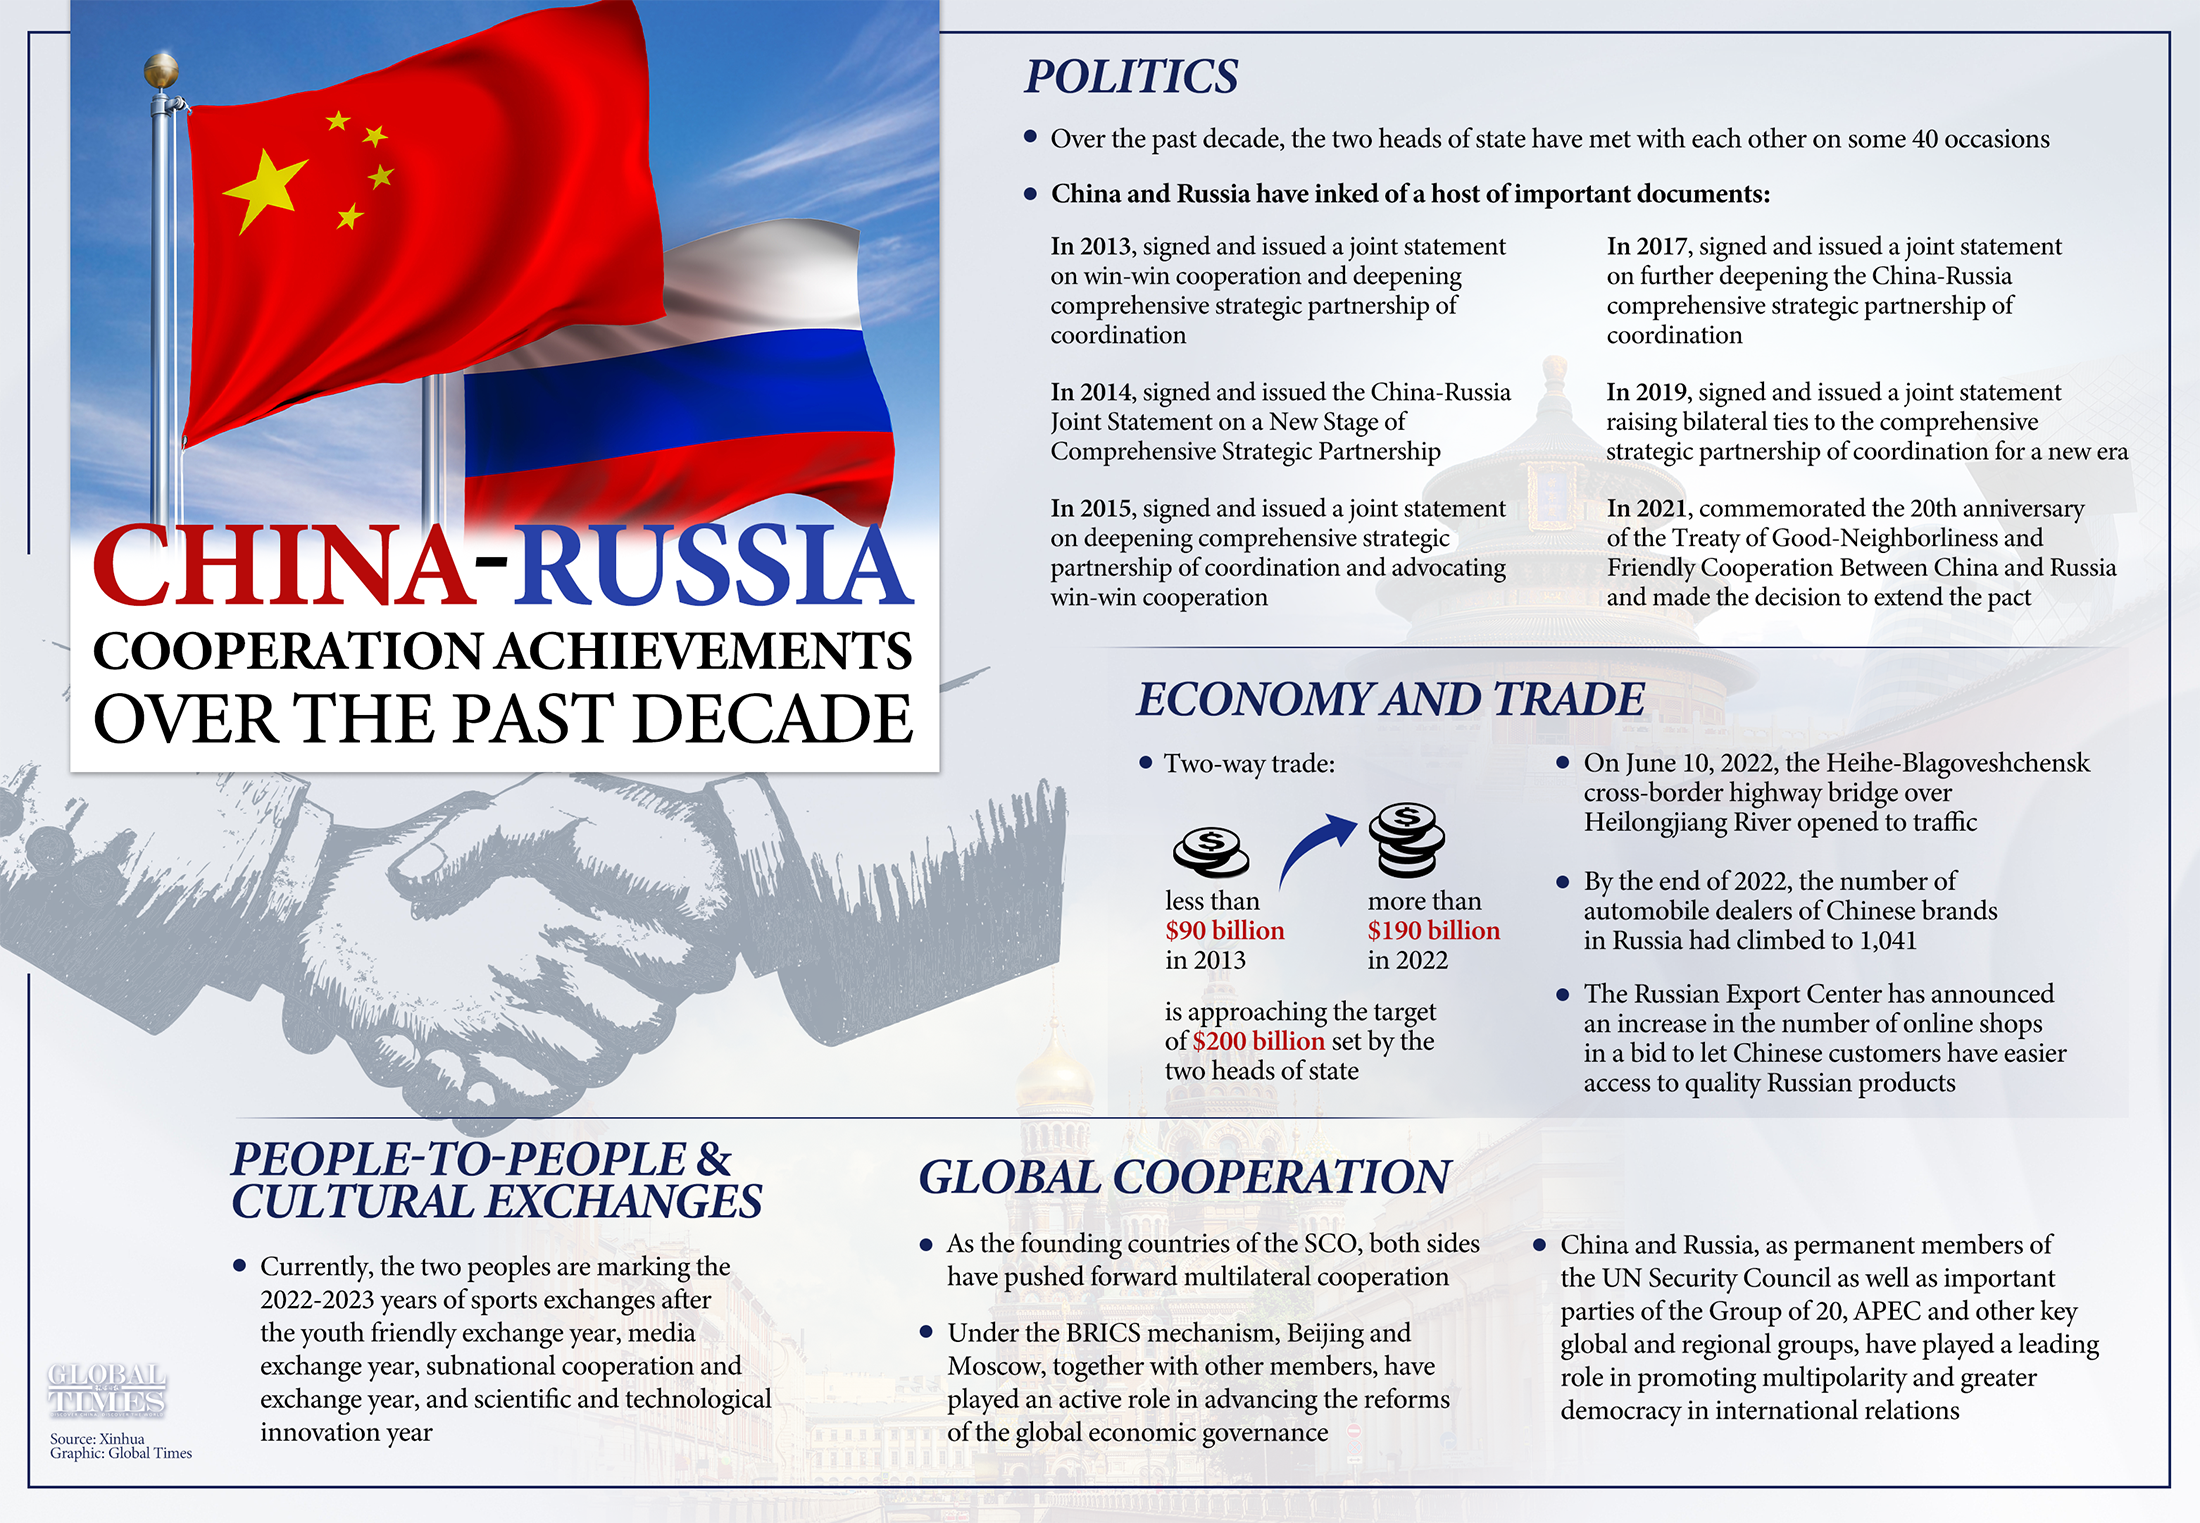 China-Russia cooperation achievements over the past decade. Graphic: GT